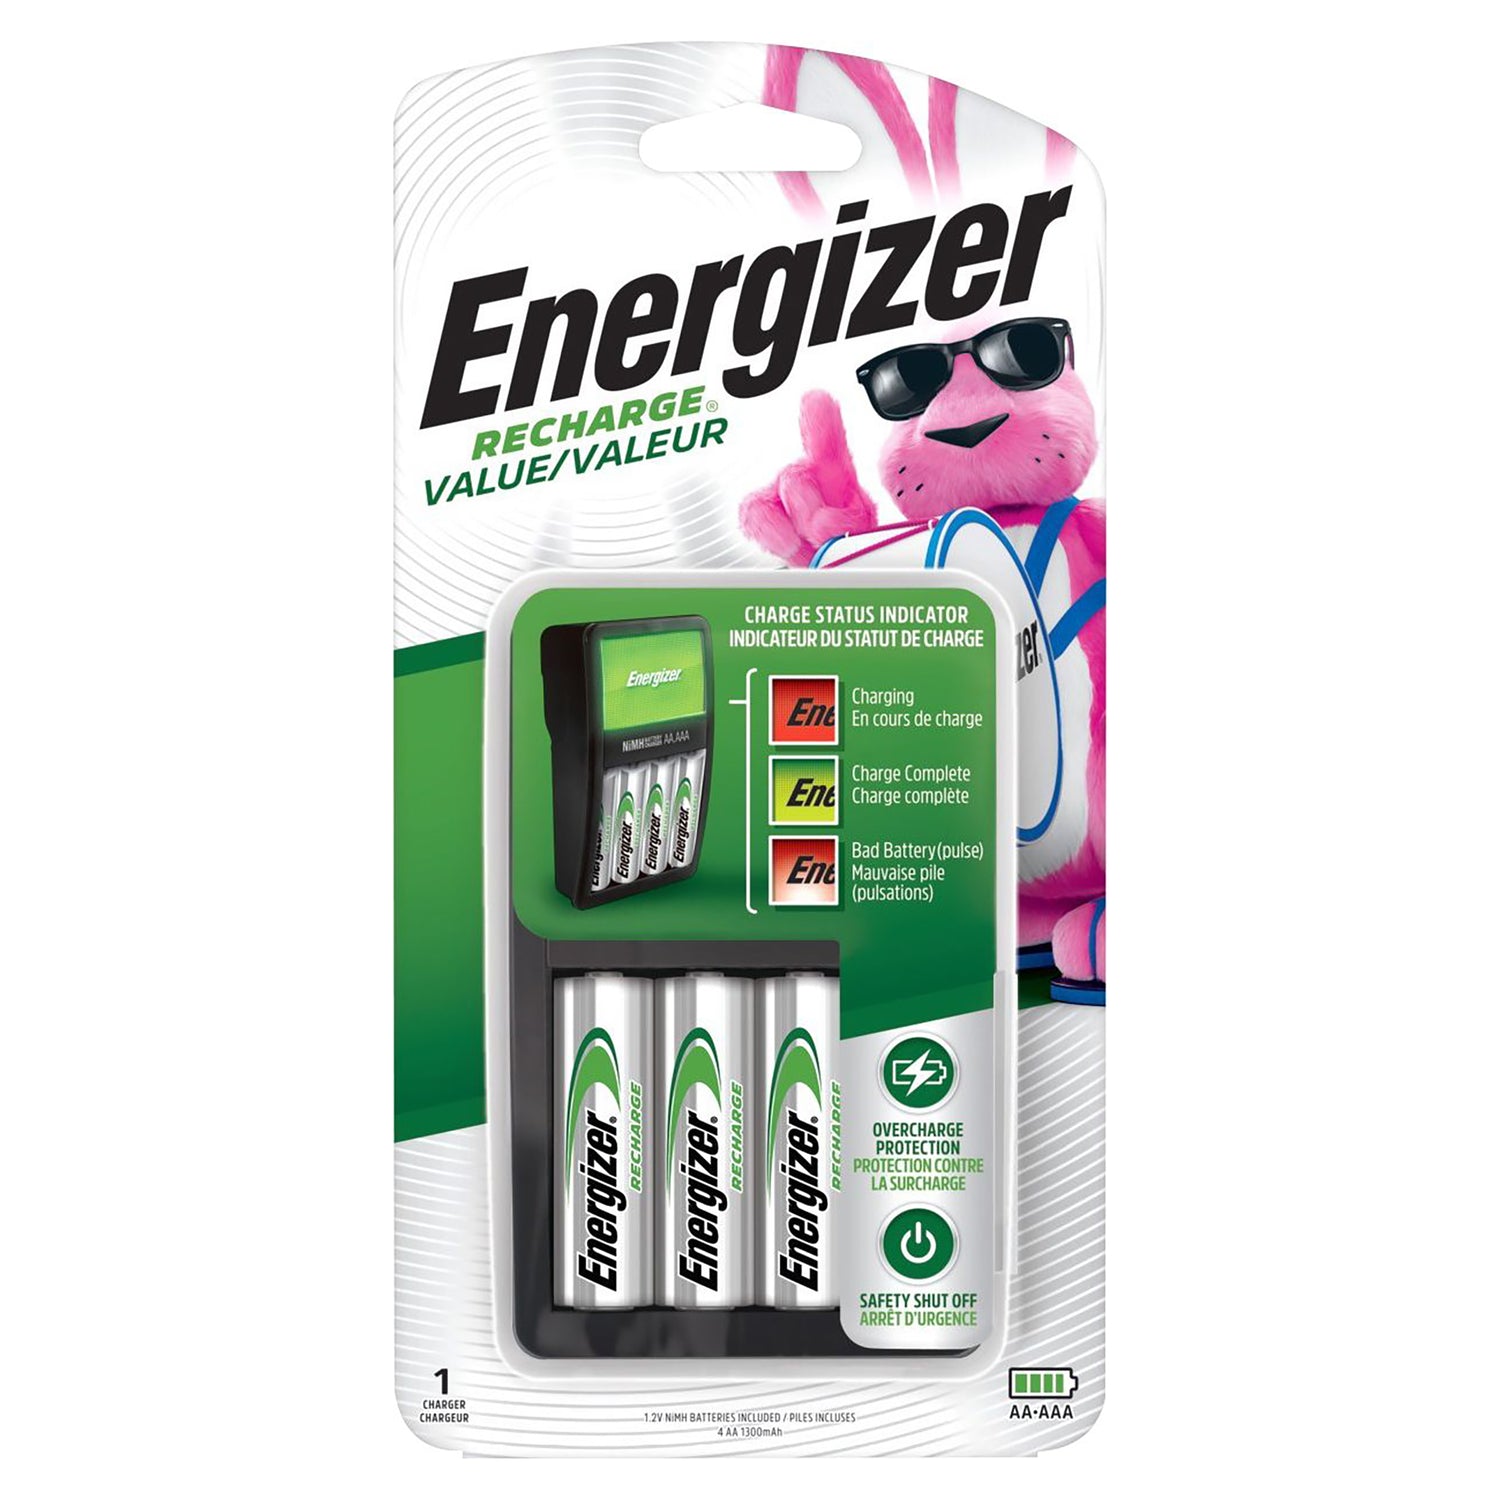 BEST VALUE CHGR INCLUDES 4AA BATTERIES BATTERY CHARGER